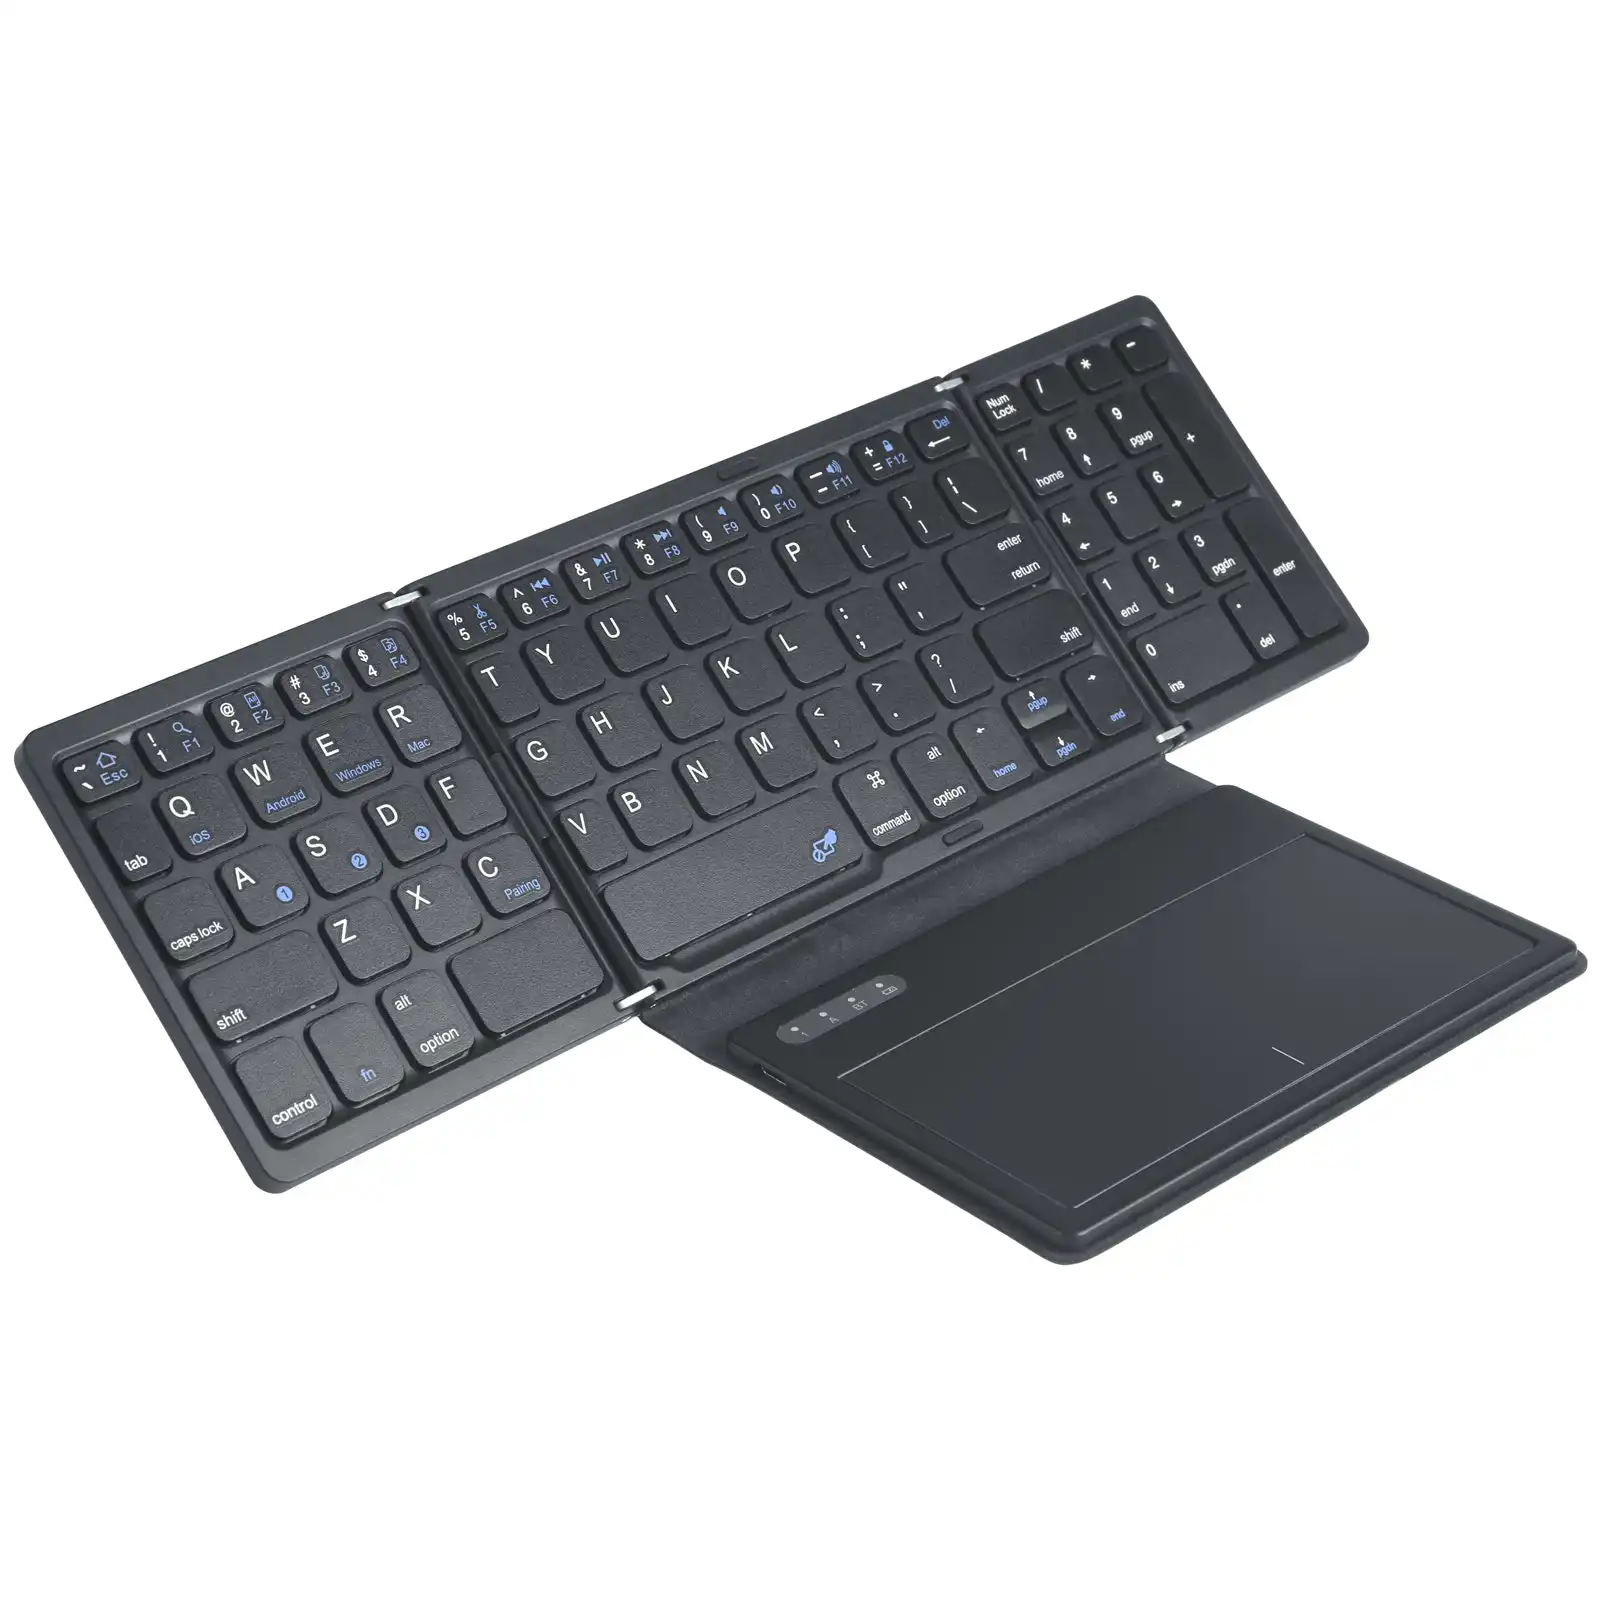 Todo Bluetooth Wireless Keyboard Touchpad Mouse 81 Key 3 Channel Mac Windows Android - Black